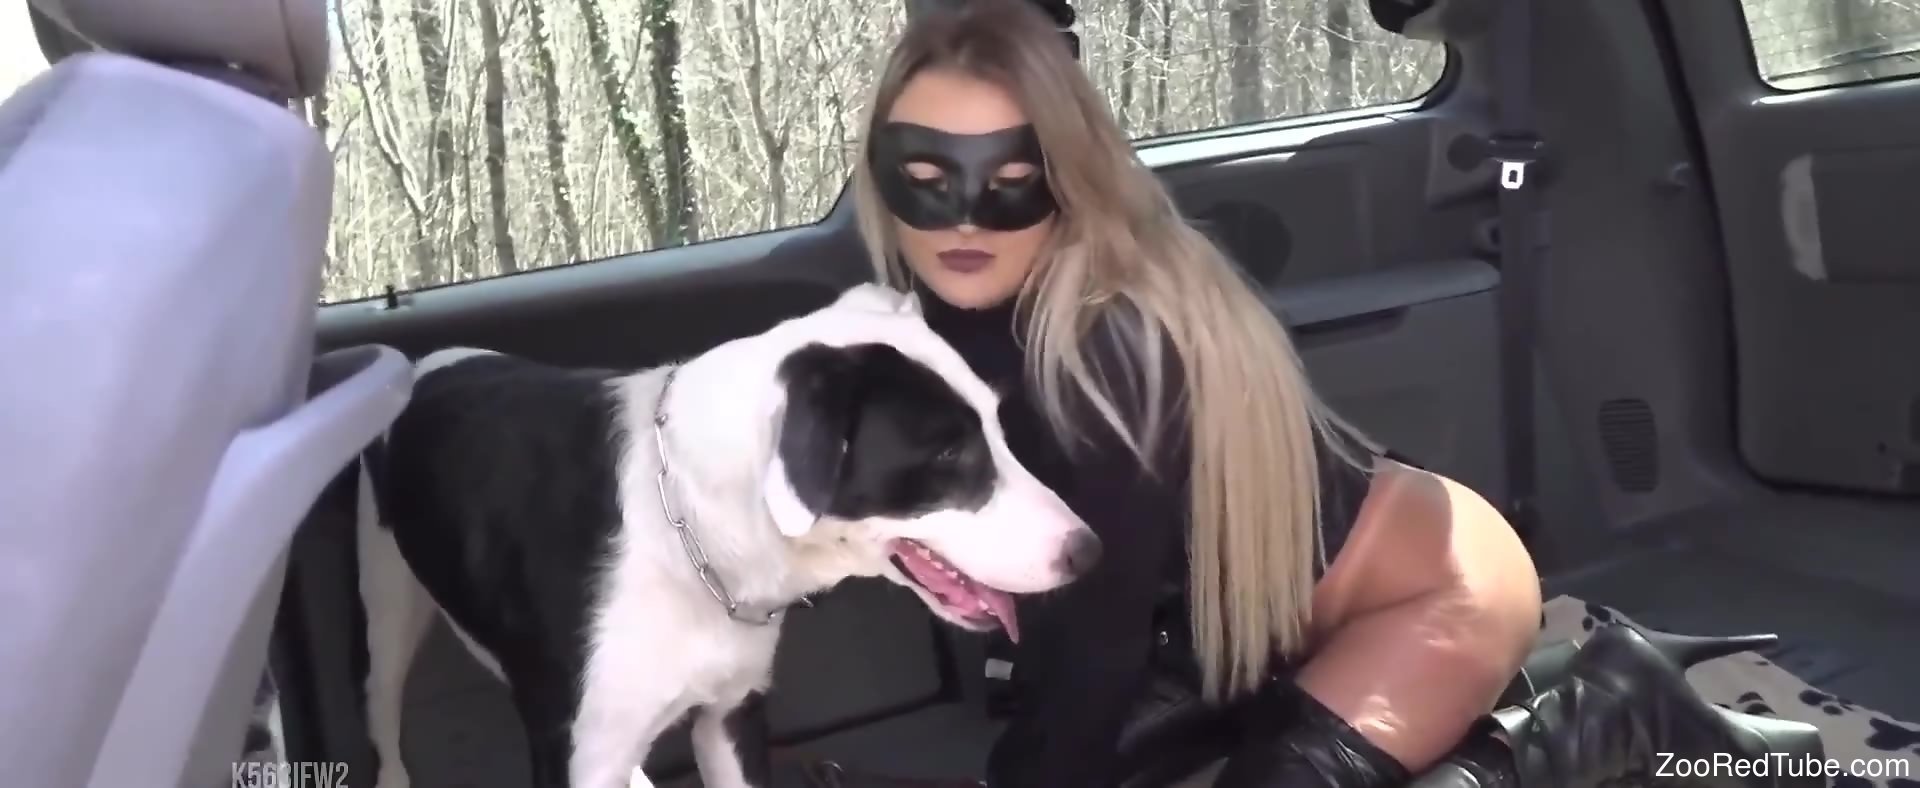 Xxx Video Dog Lades - Fine woman with sexy ass, doggy porn with a real dog in the car